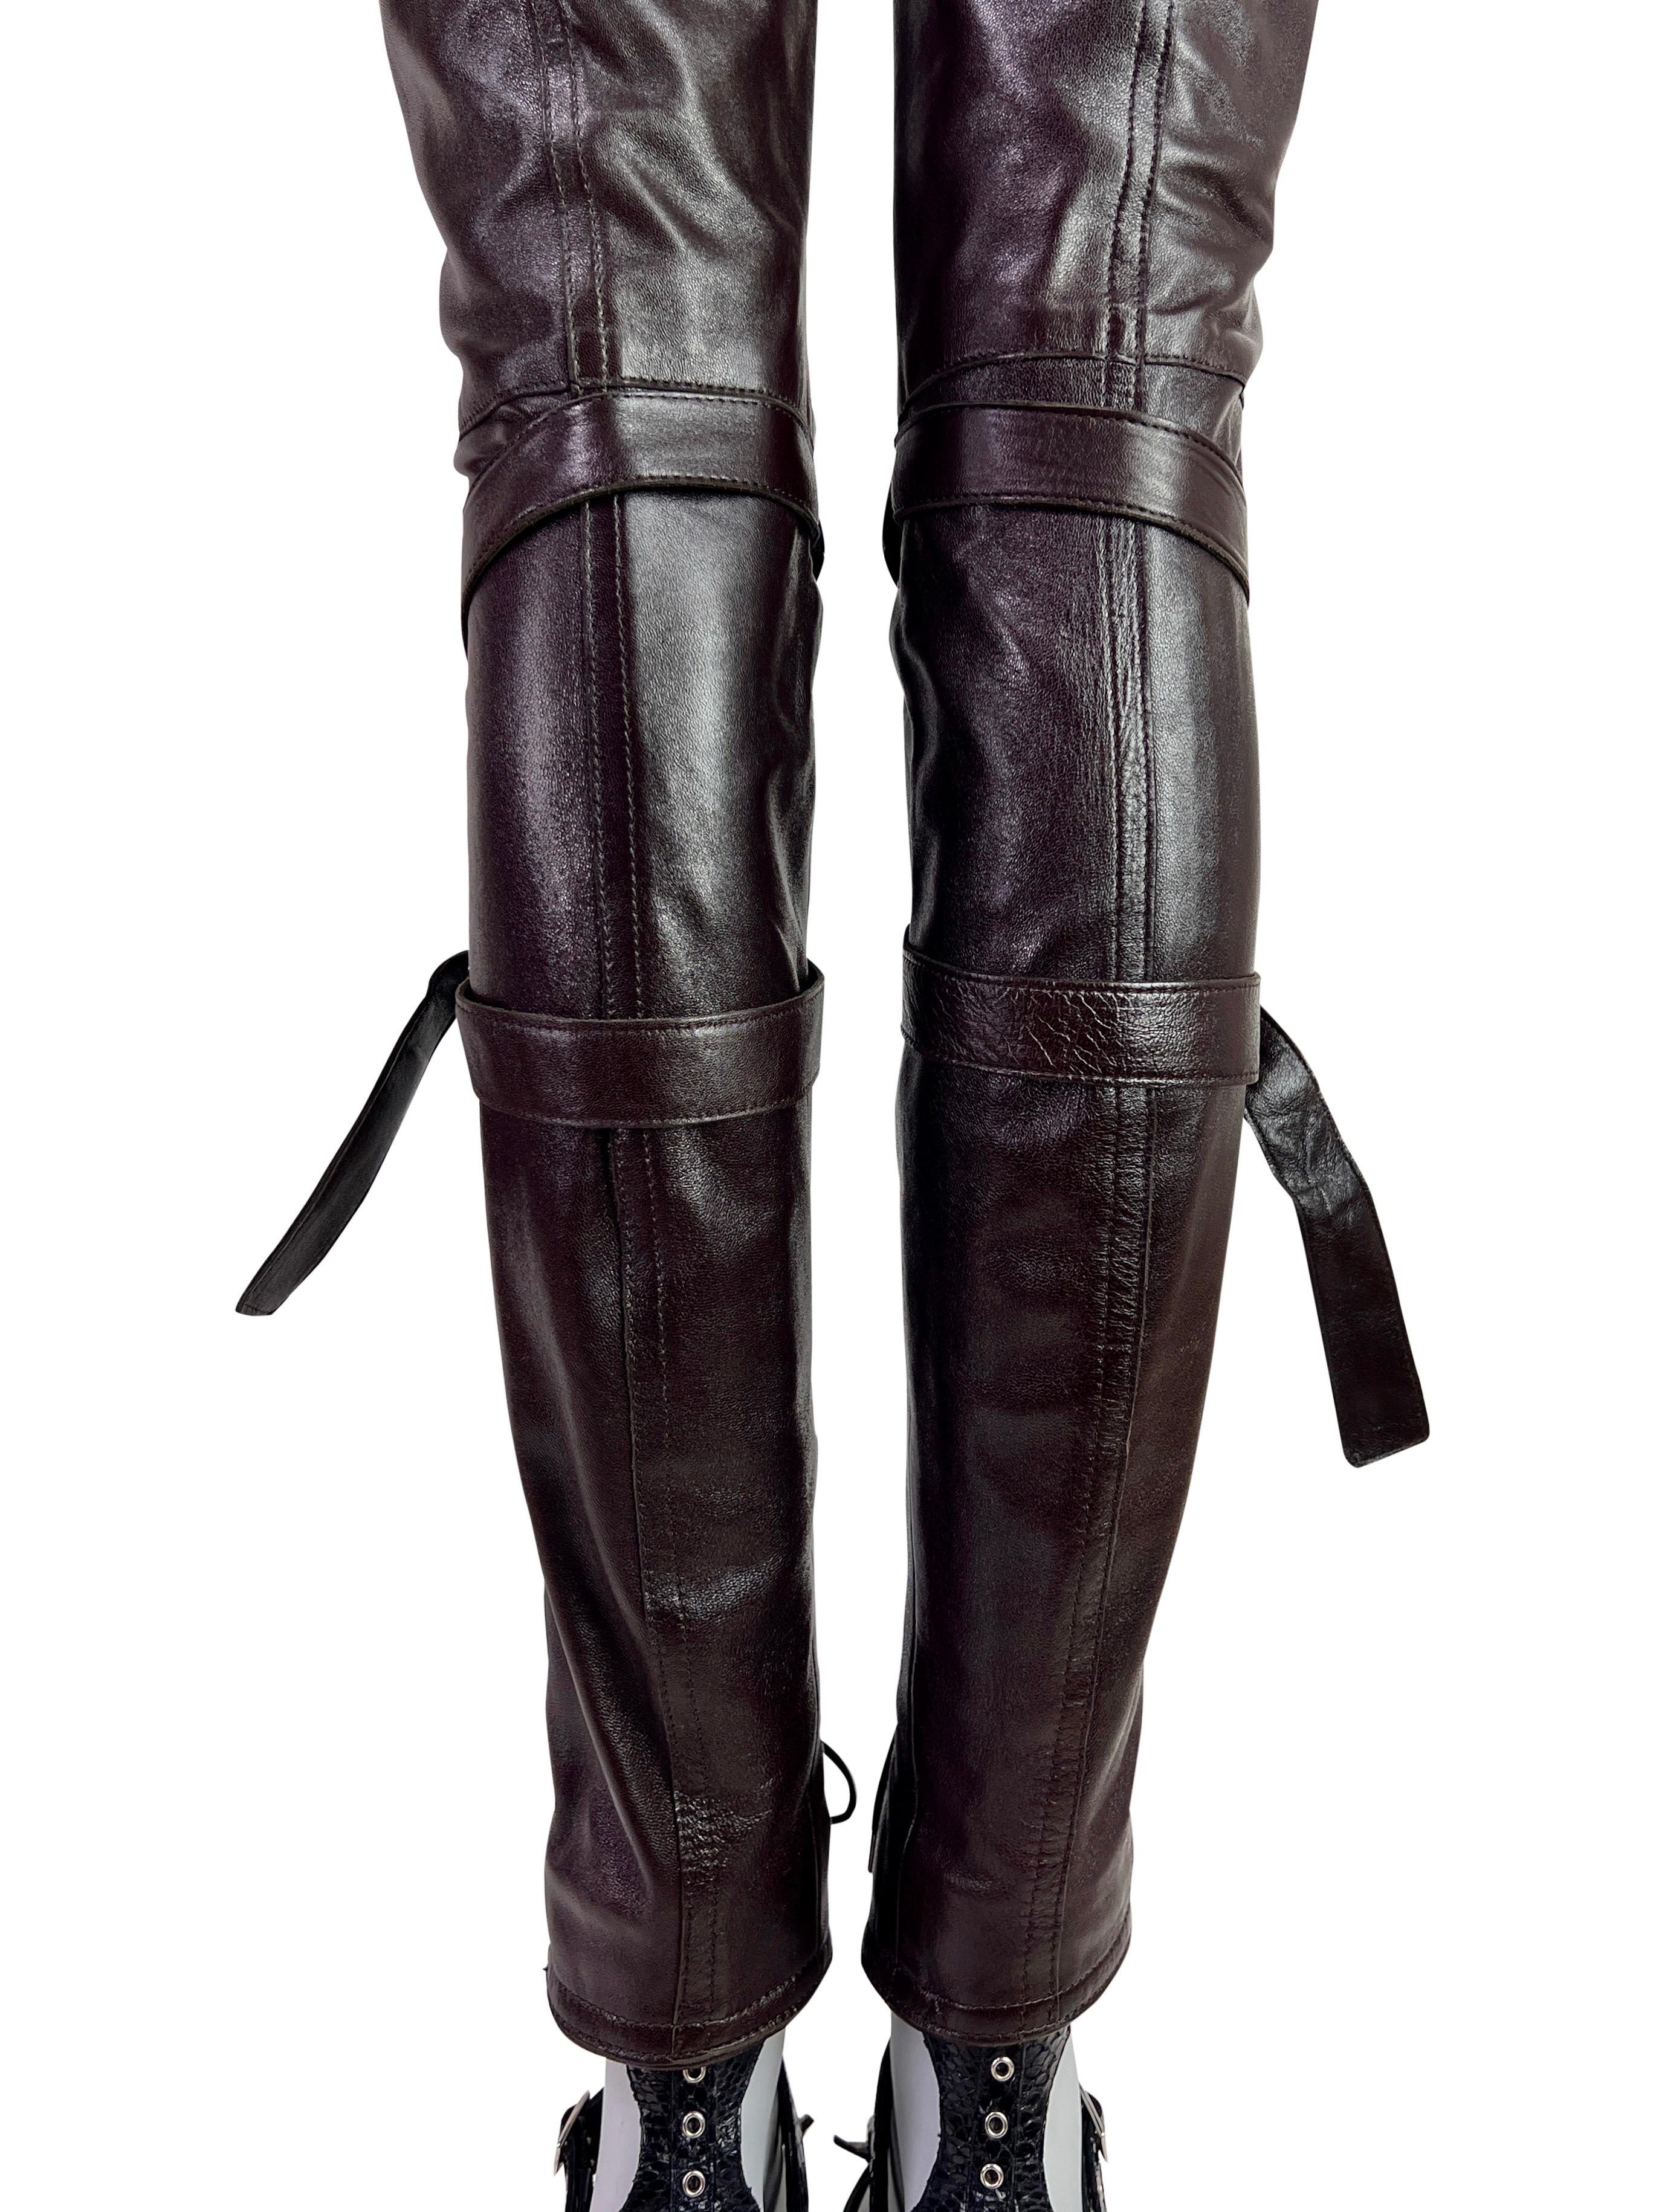 Dior by John Galliano Fall 2003 Leather Lace-Up Pants in Dark Chocolate For Sale 6